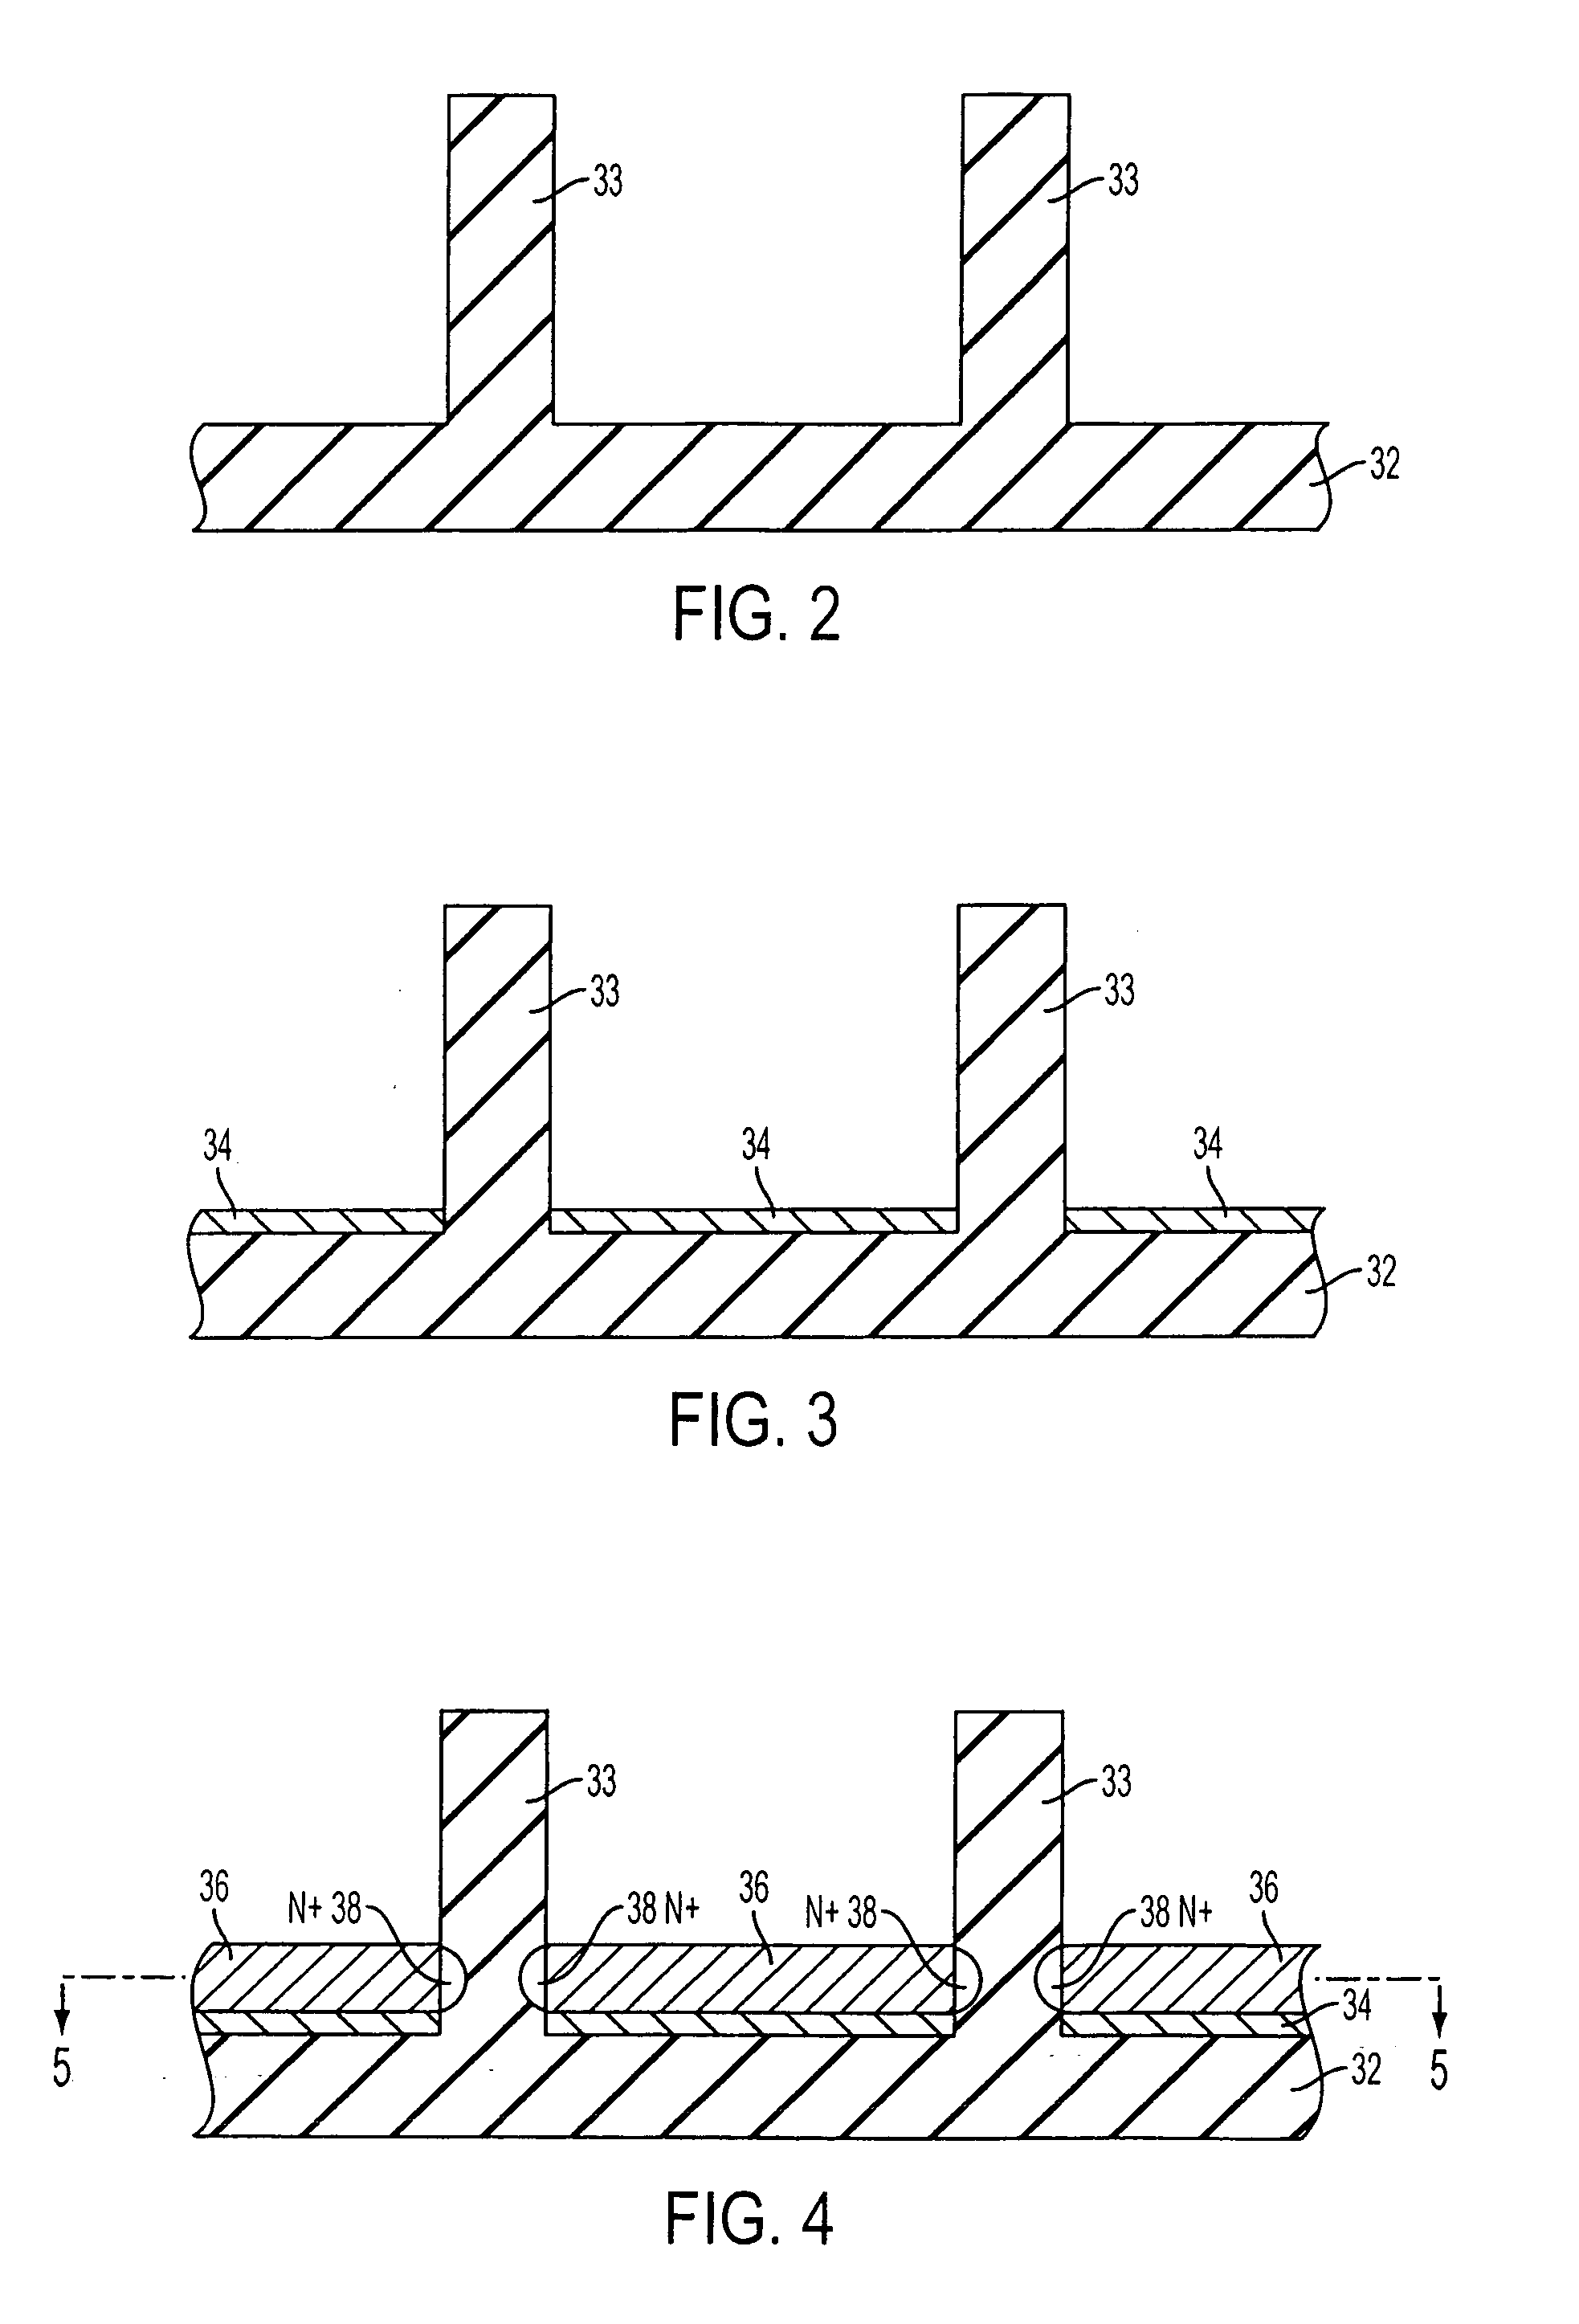 Random access memory device utilizing a vertically oriented select transistor